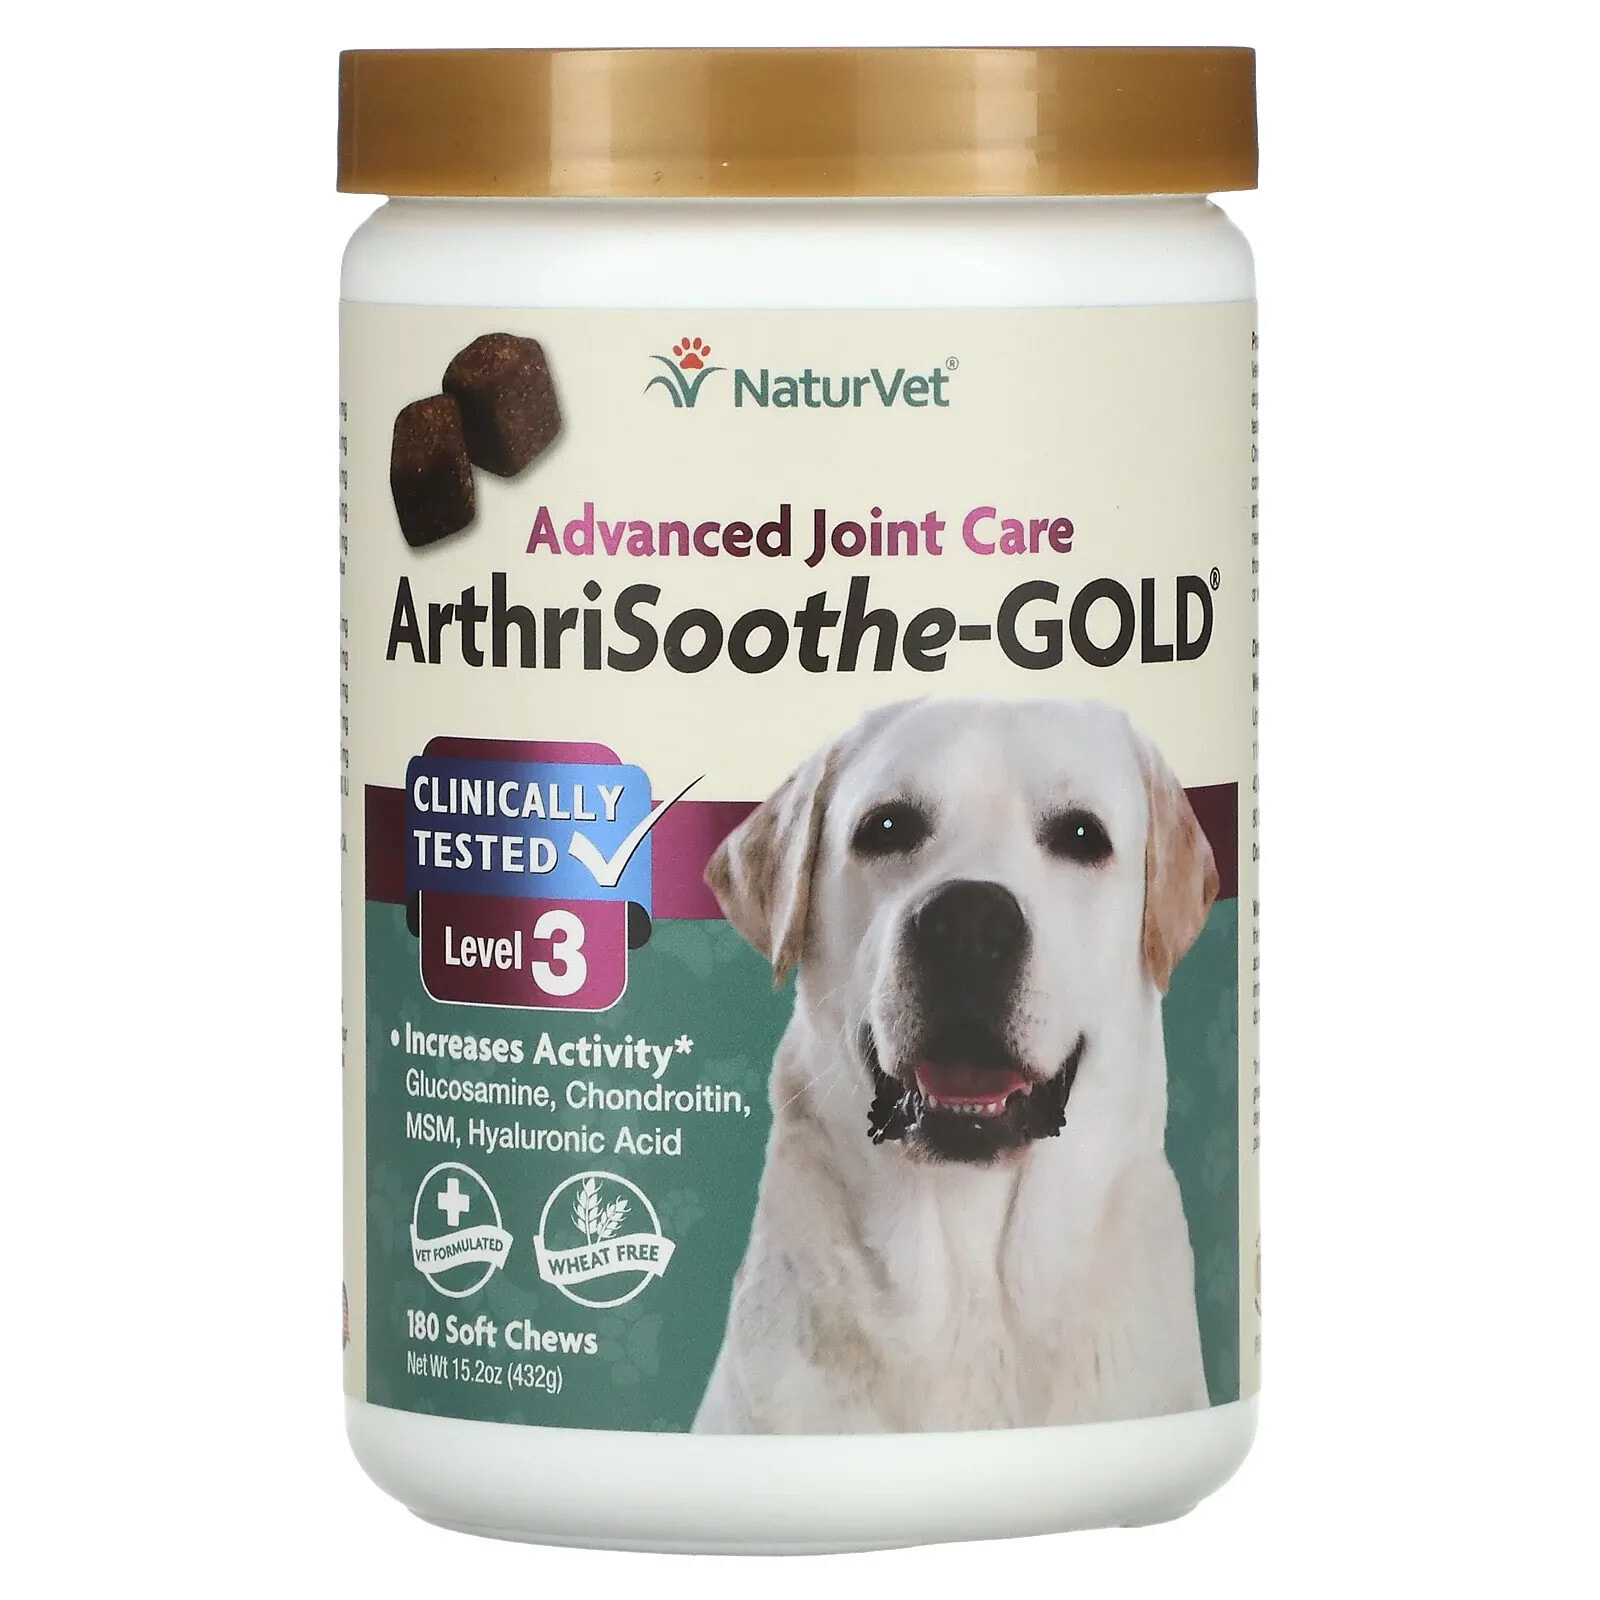 ArthriSoothe-GOLD, Advanced Joint Care, For Dogs & Cats, Level 3, 180 Soft Chews, 15.2 oz (432 g)